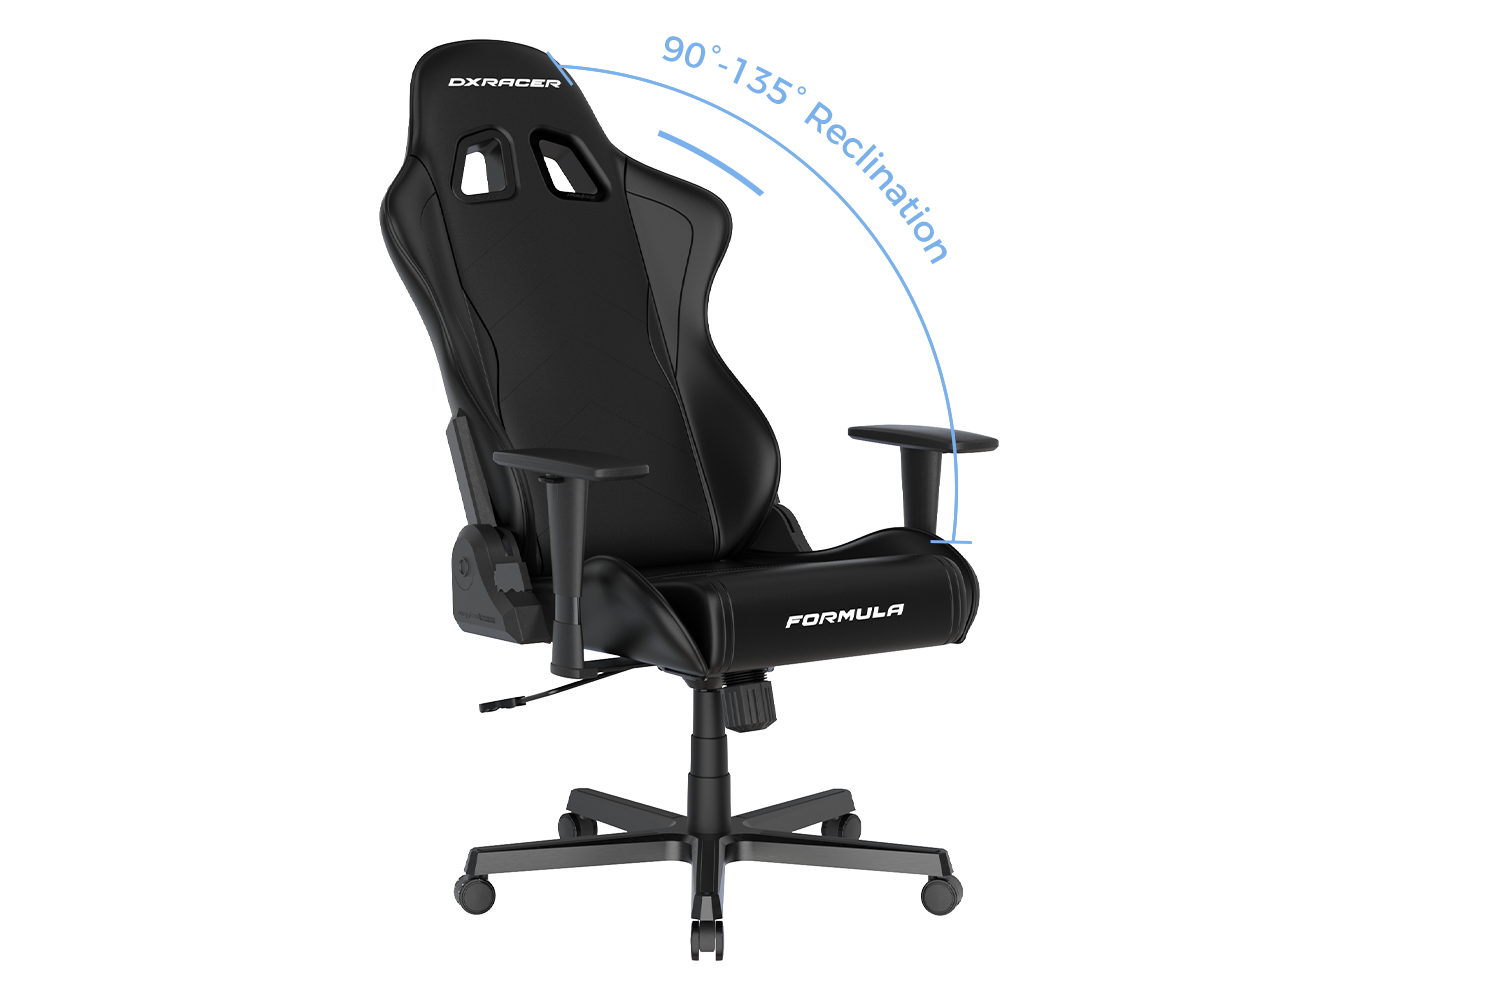 FD01 L | Series Regular Gaming | Chair Water-Resistant Red USA Formula Fabric DXRacer & / | | Black